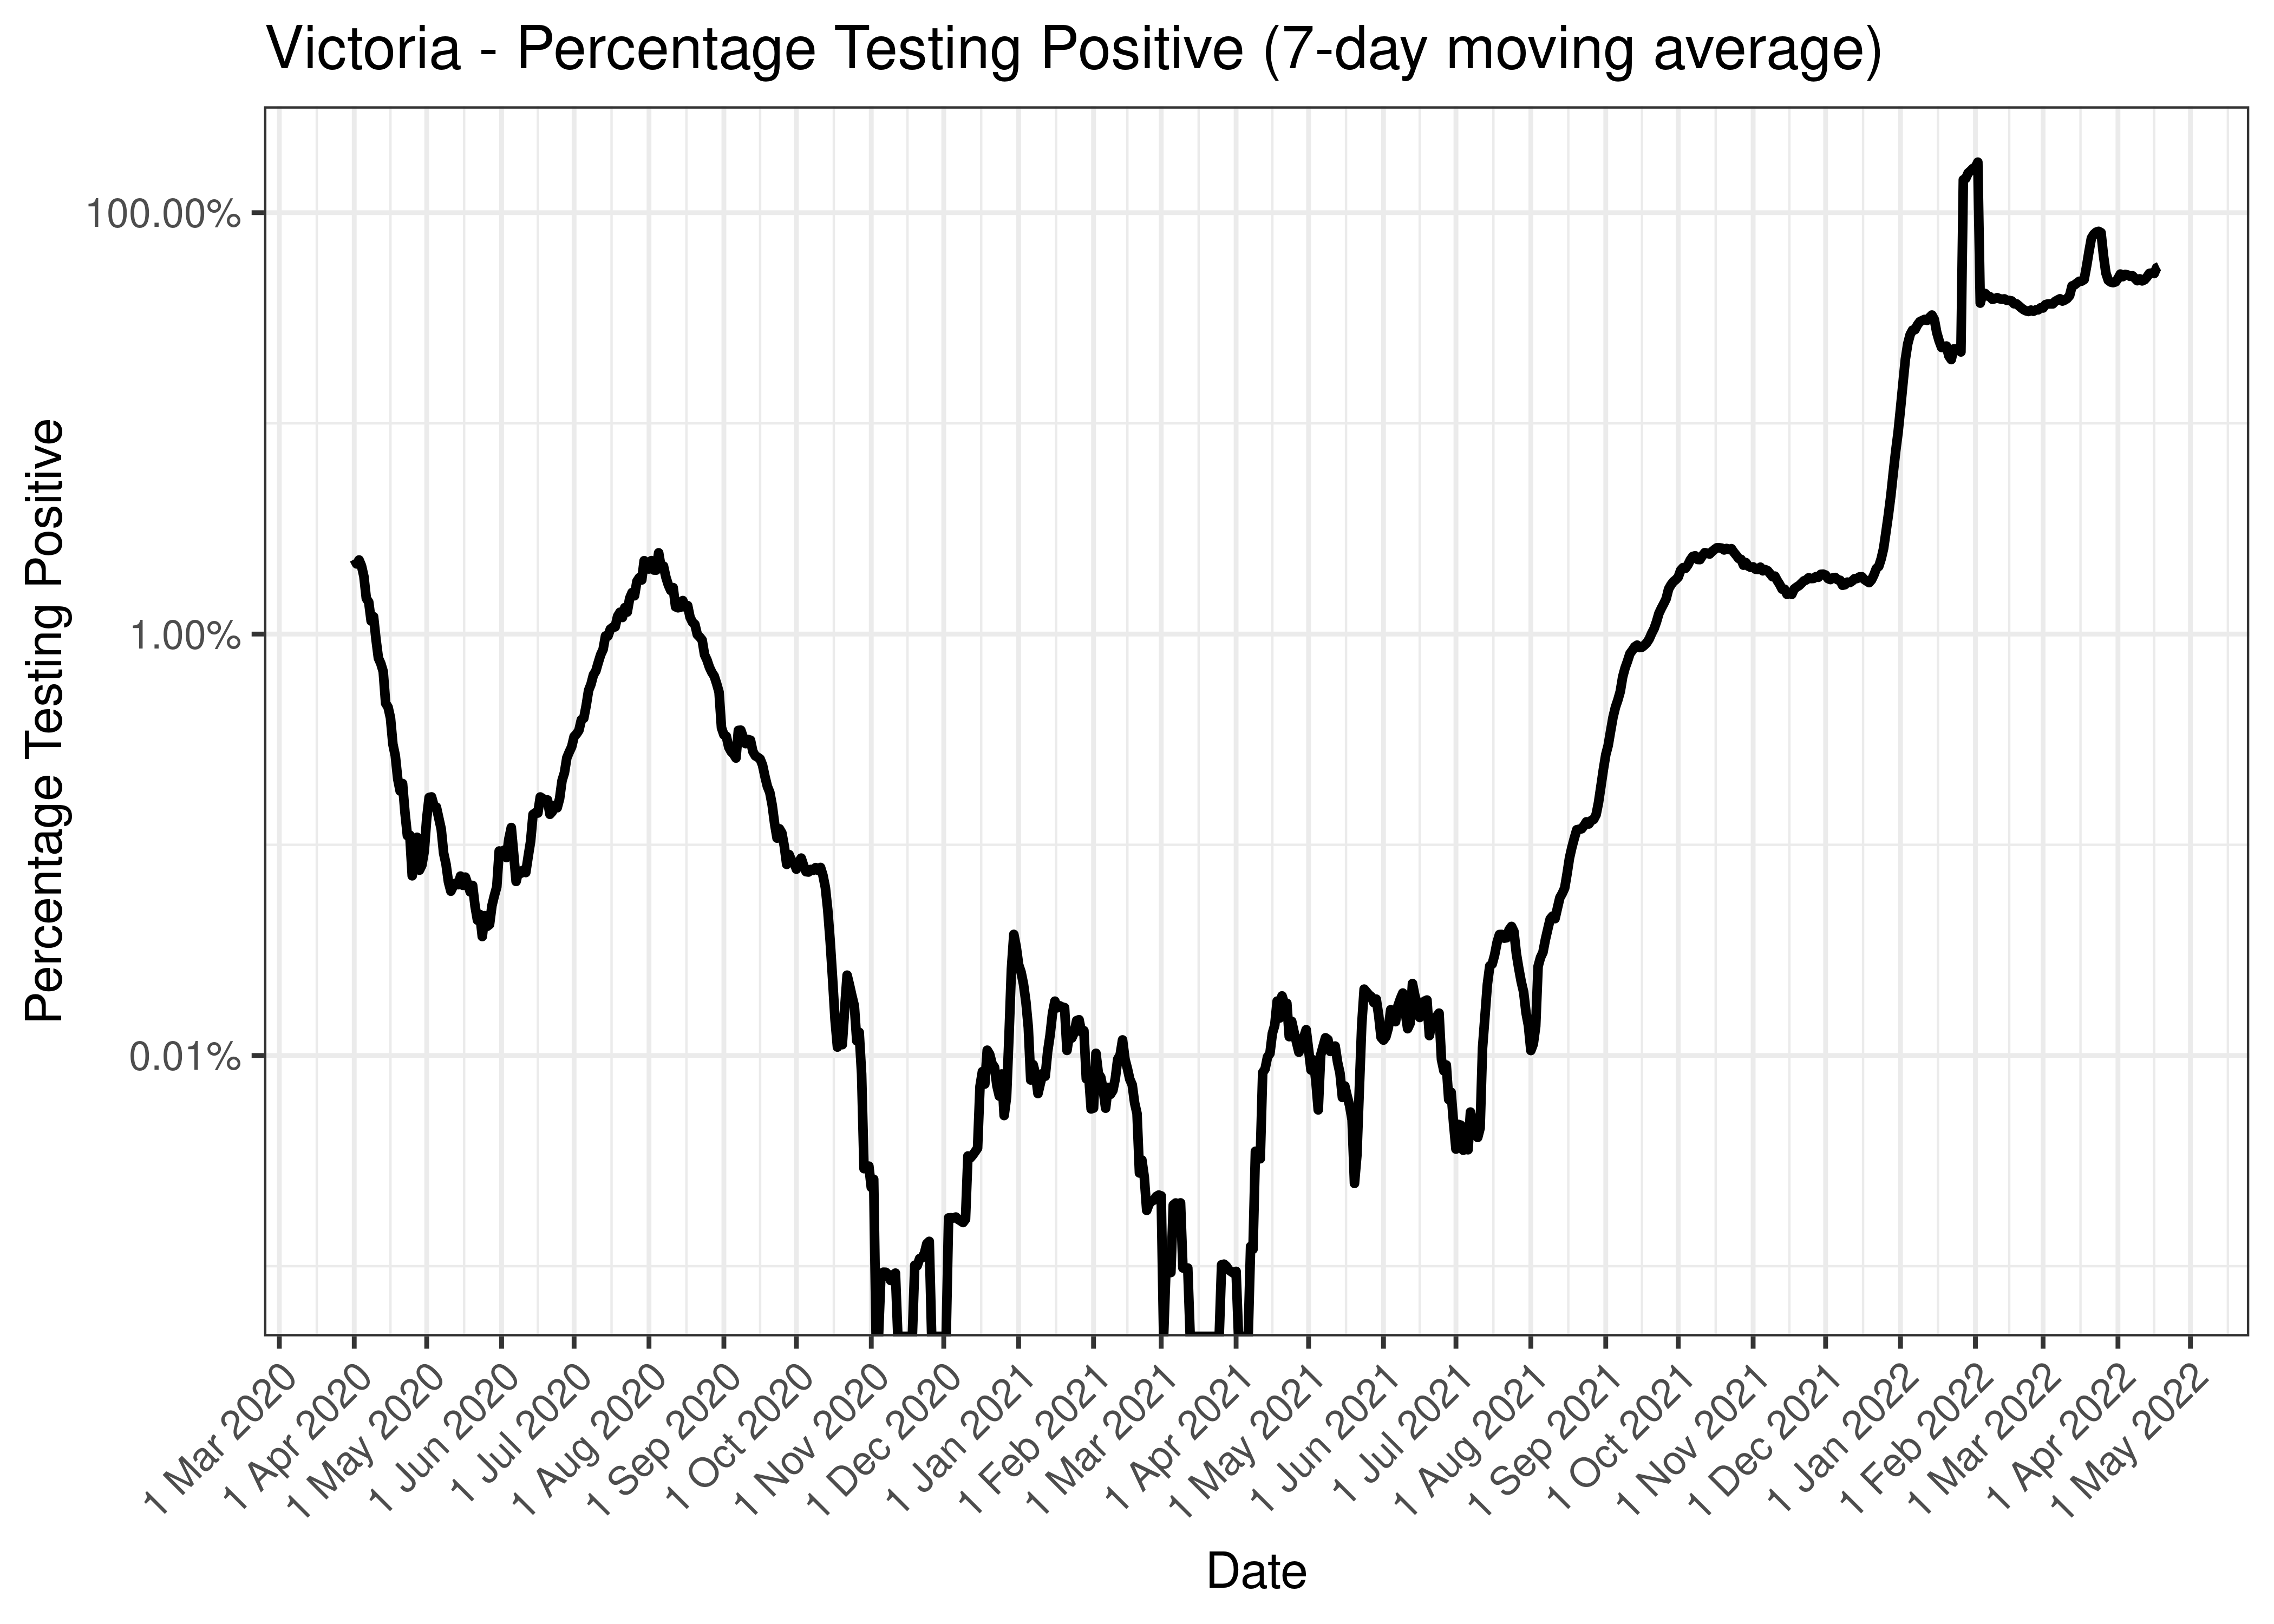 Victoria - Percentage Testing Positive (7-day moving average)